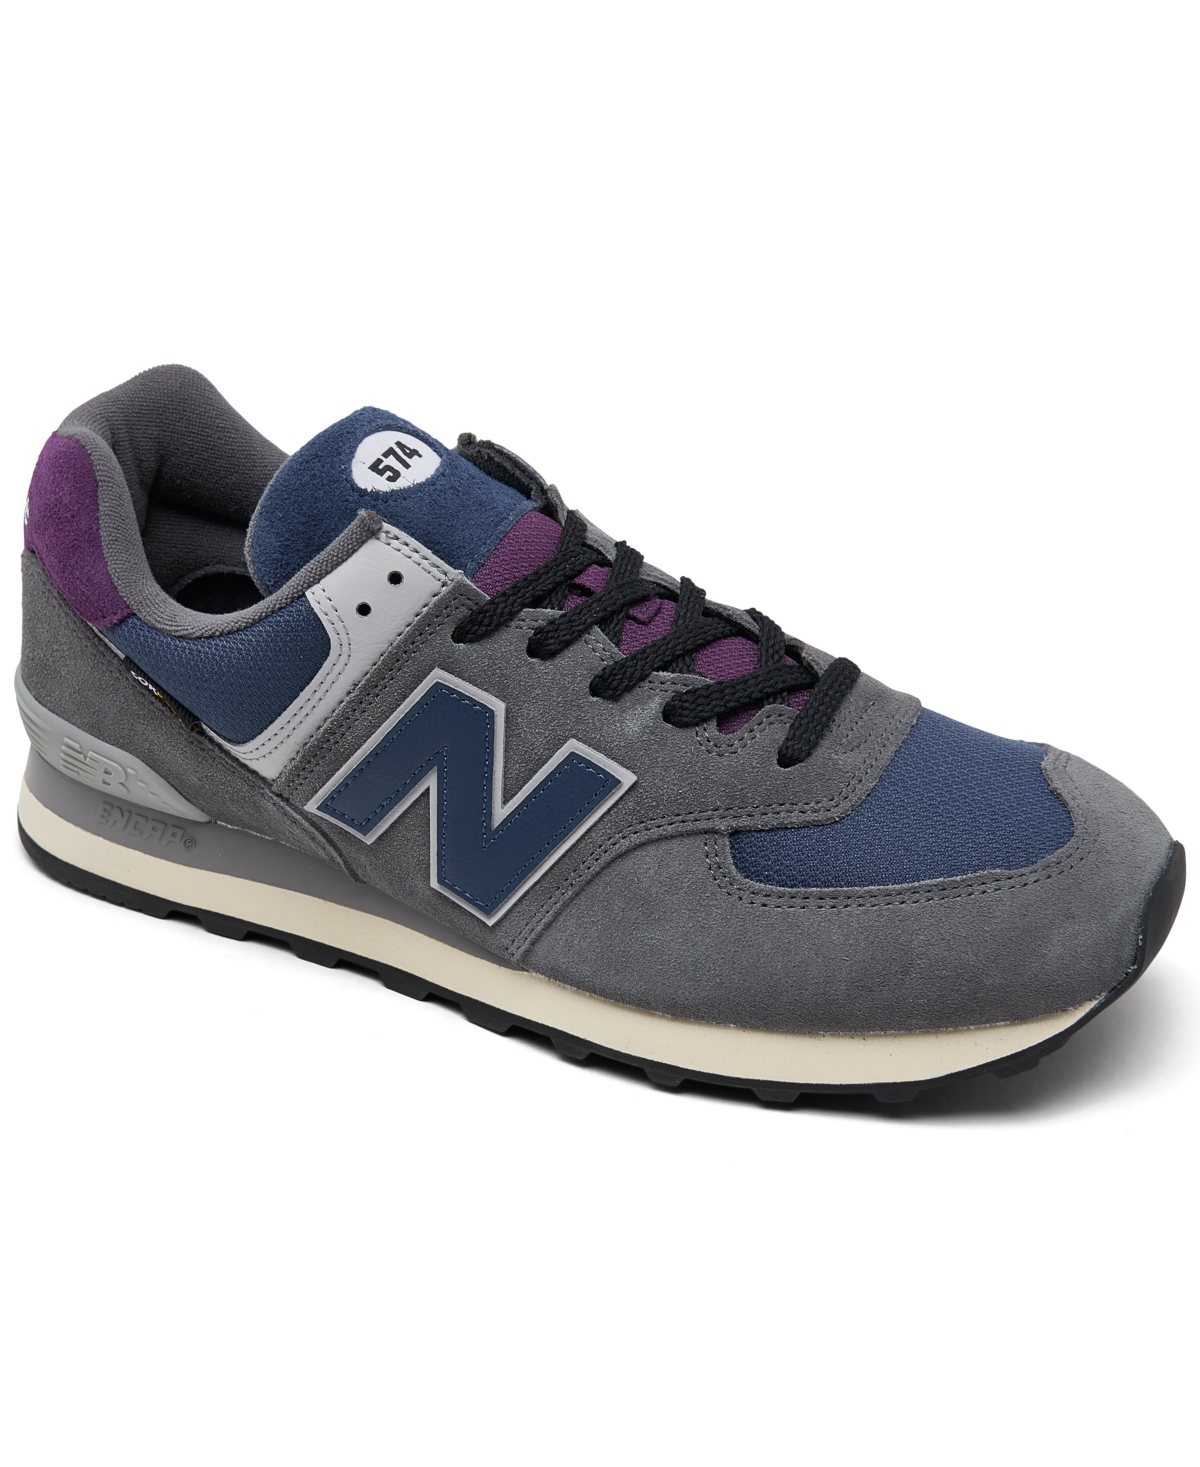 New Balance Men's 574 Casual Sneakers From Finish Line In Gray,navy,purple